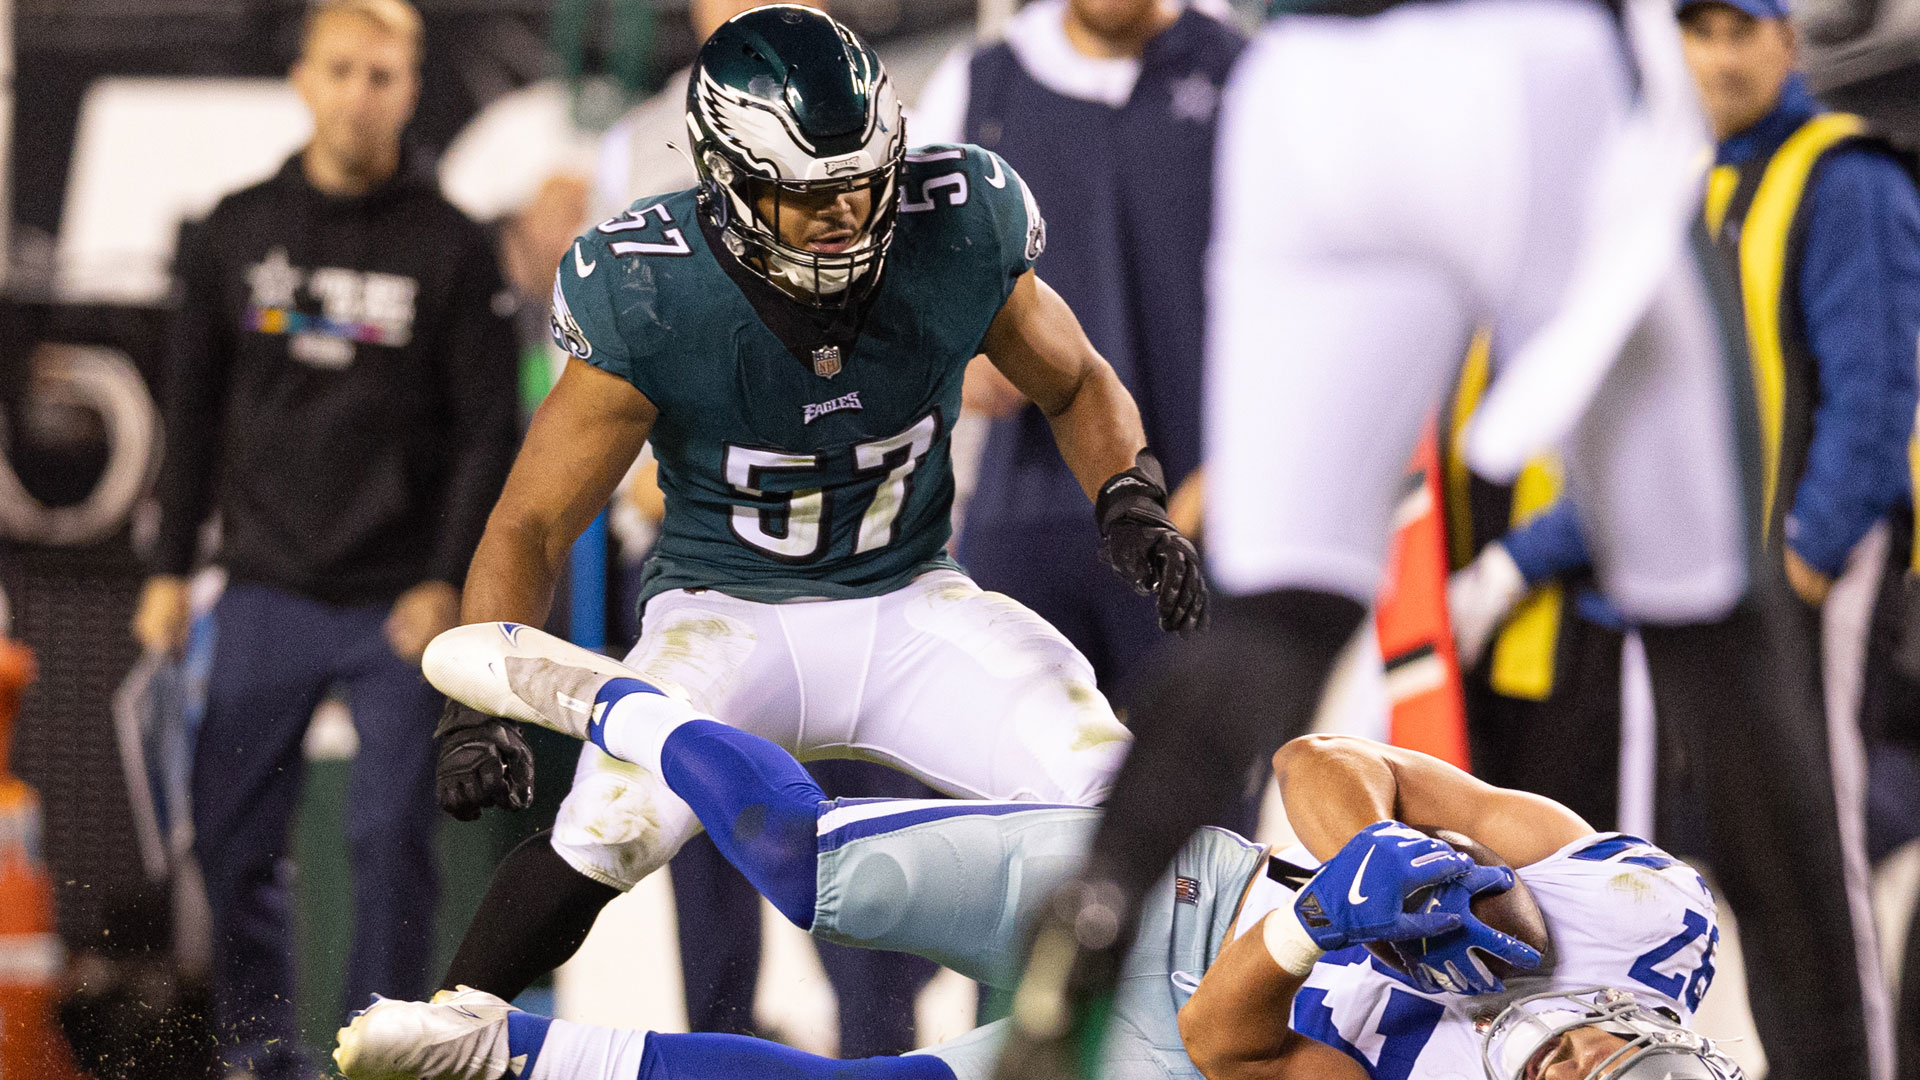 Will Eagles Beat Cowboys on Christmas Eve? Here's the Predictions